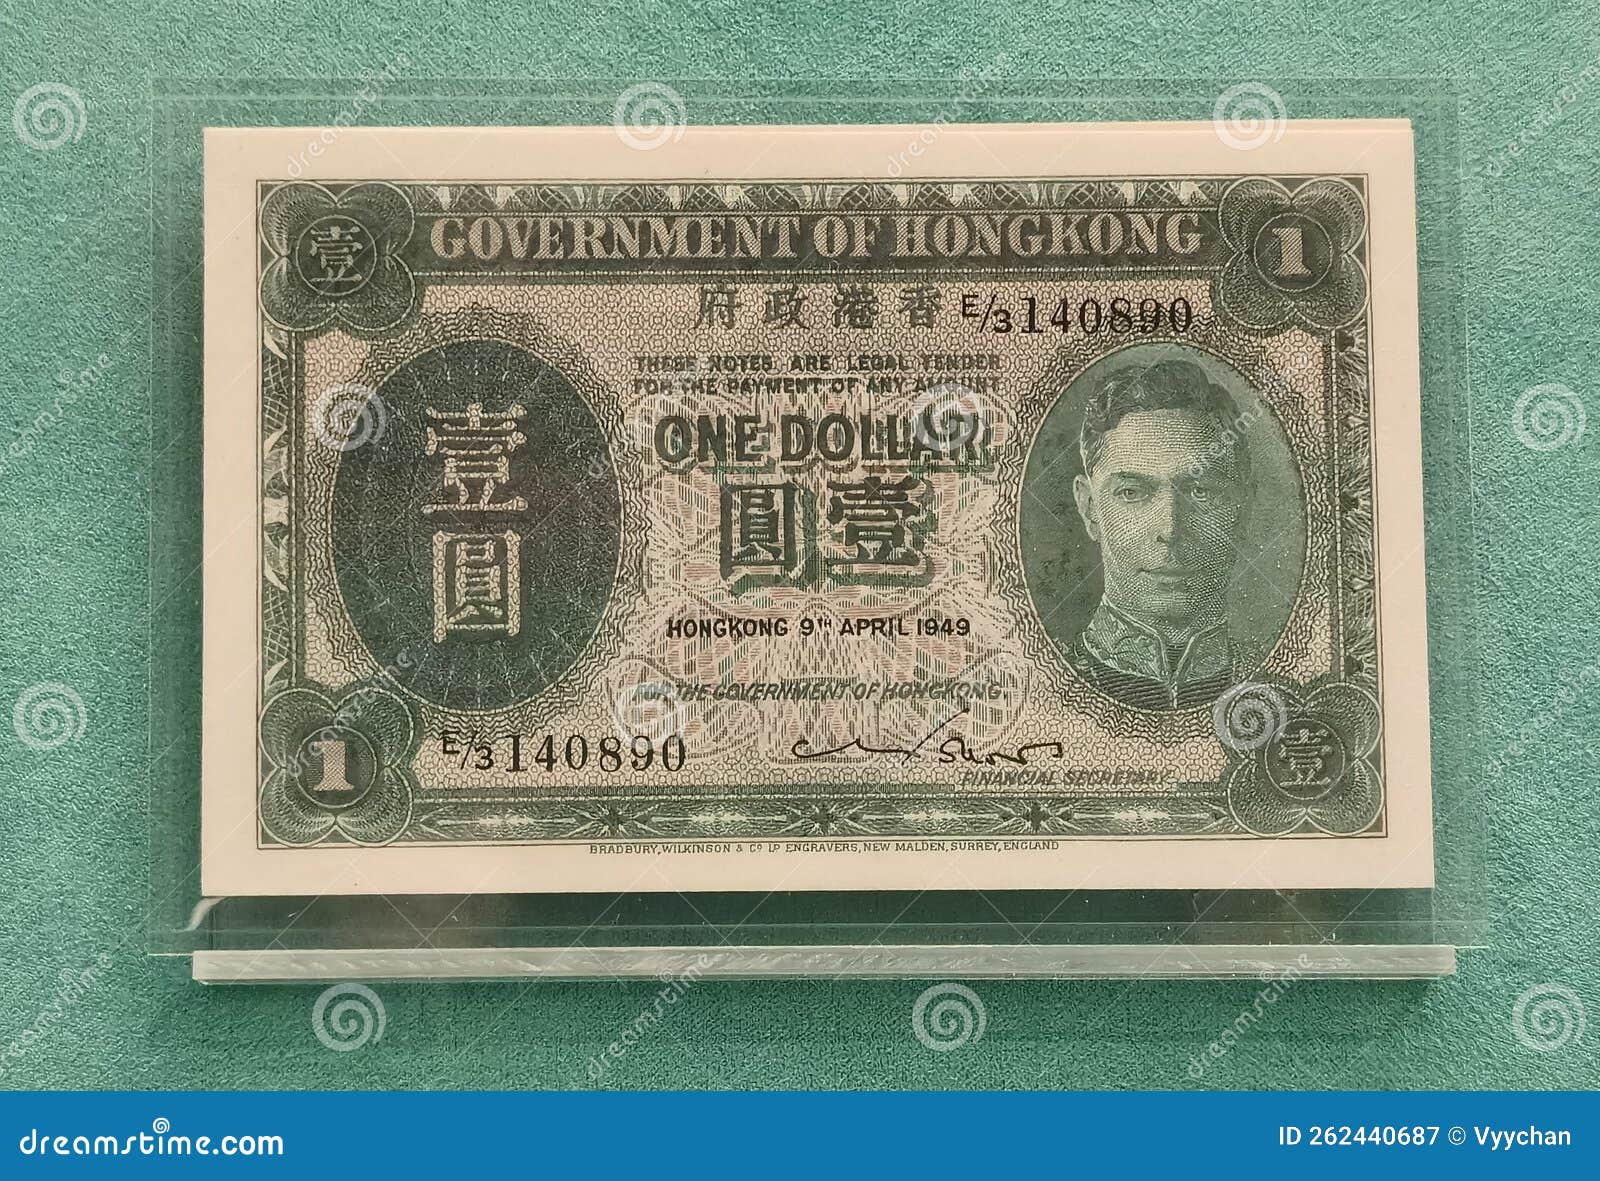 royal mint british colony hong kong paper money currency note hk governor cultural heritage duke of windsor colonial memorial coin